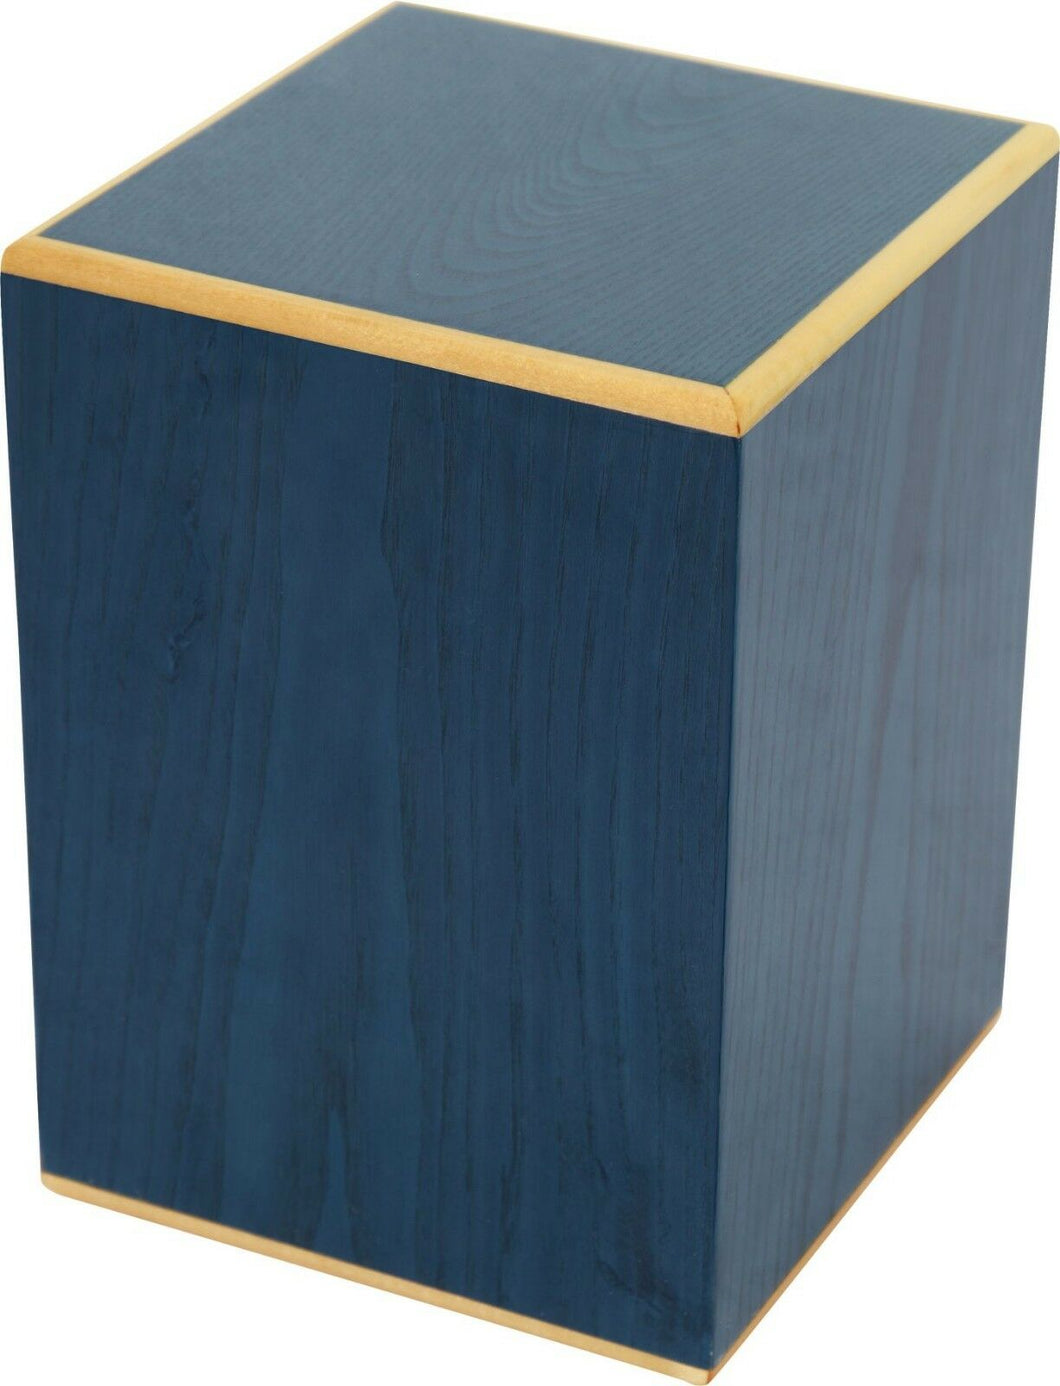 Large/Adult 210 Cubic Inches Blue Box Wood Cremation Urn for Ashes